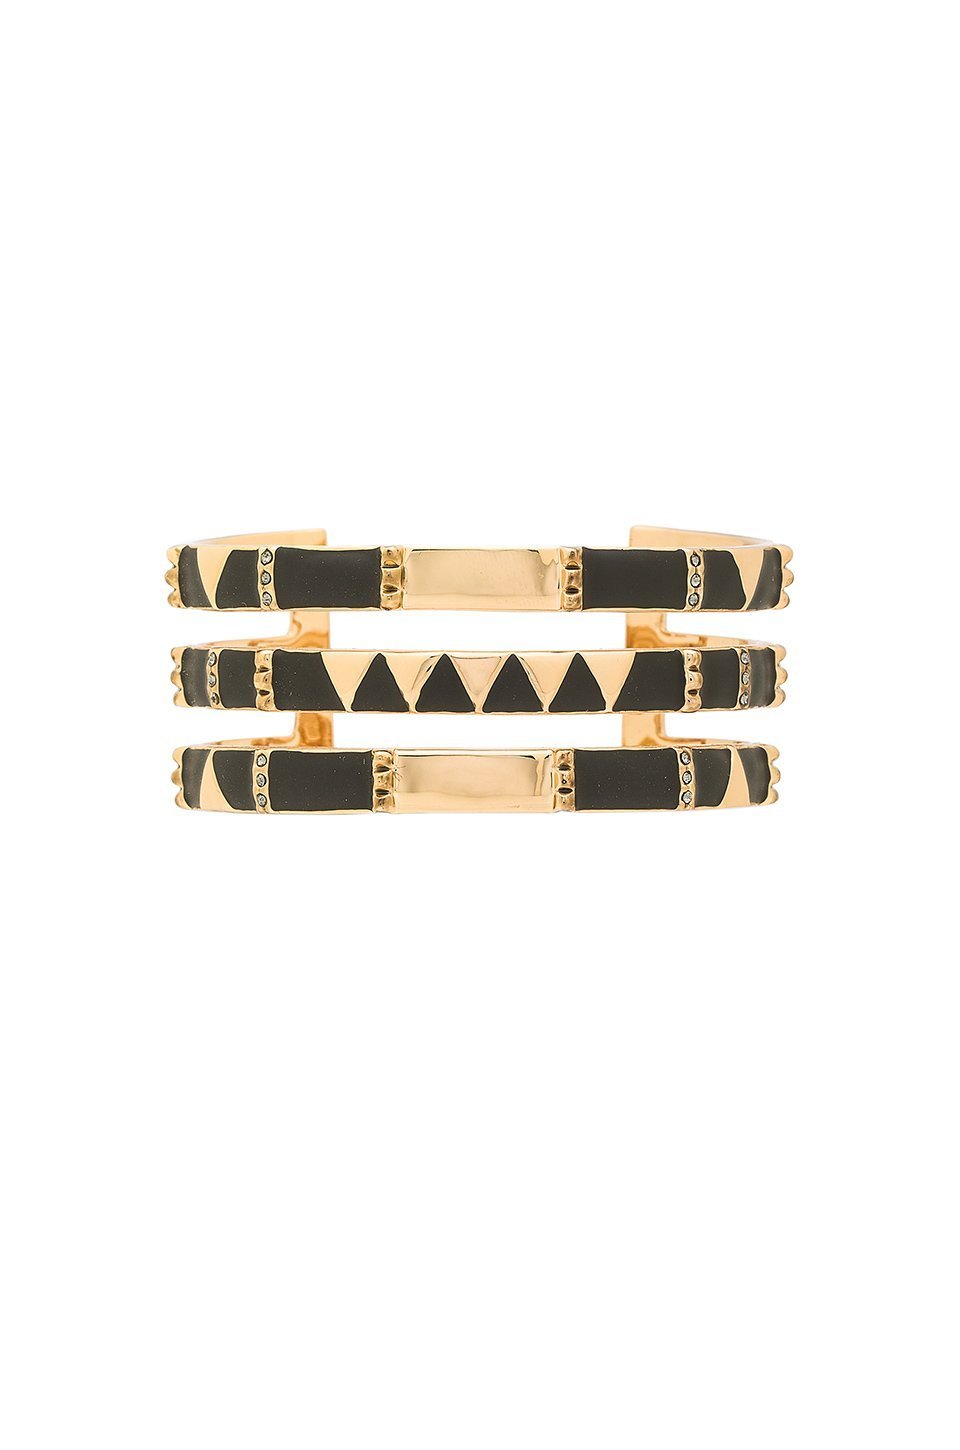 Women outfit in a bracelet rental from House of Harlow 1960 called Nelli Cuff Bracelet